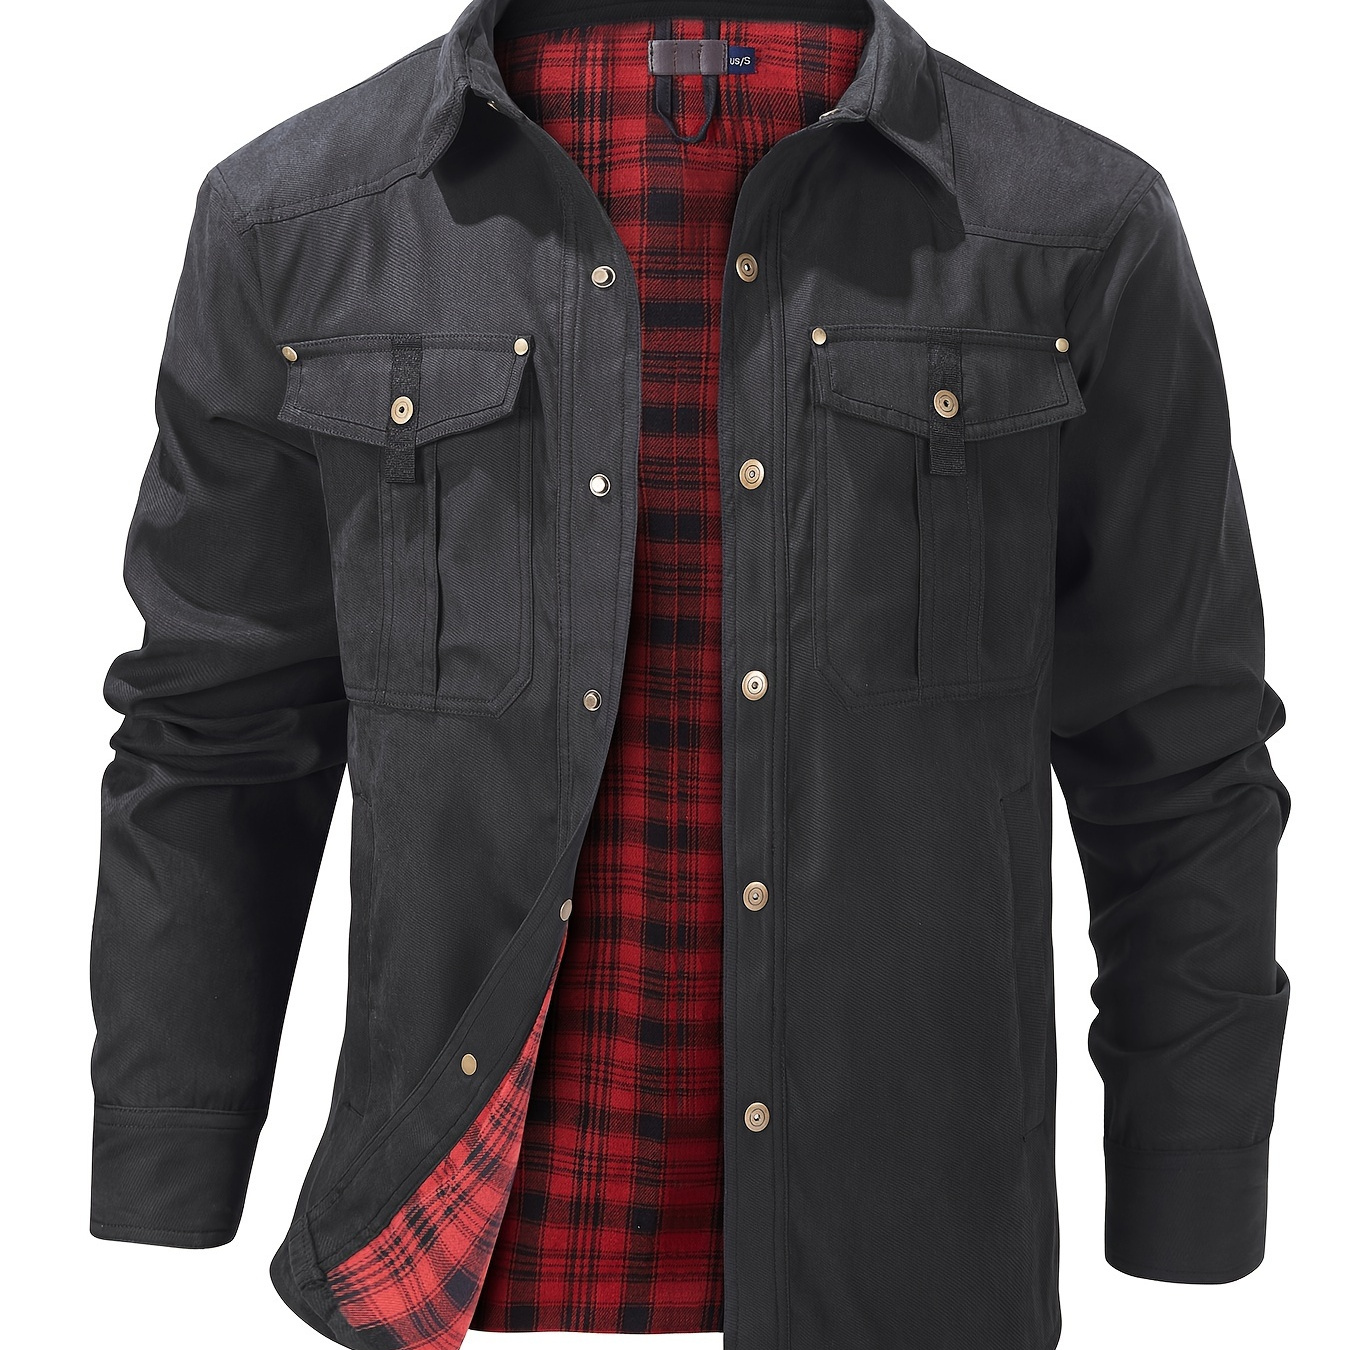 

Men's Fashion Casual Solid Color Plaid Work Jacket, Mature Style Button Down Outerwear With Flap Pockets, Spring Fall